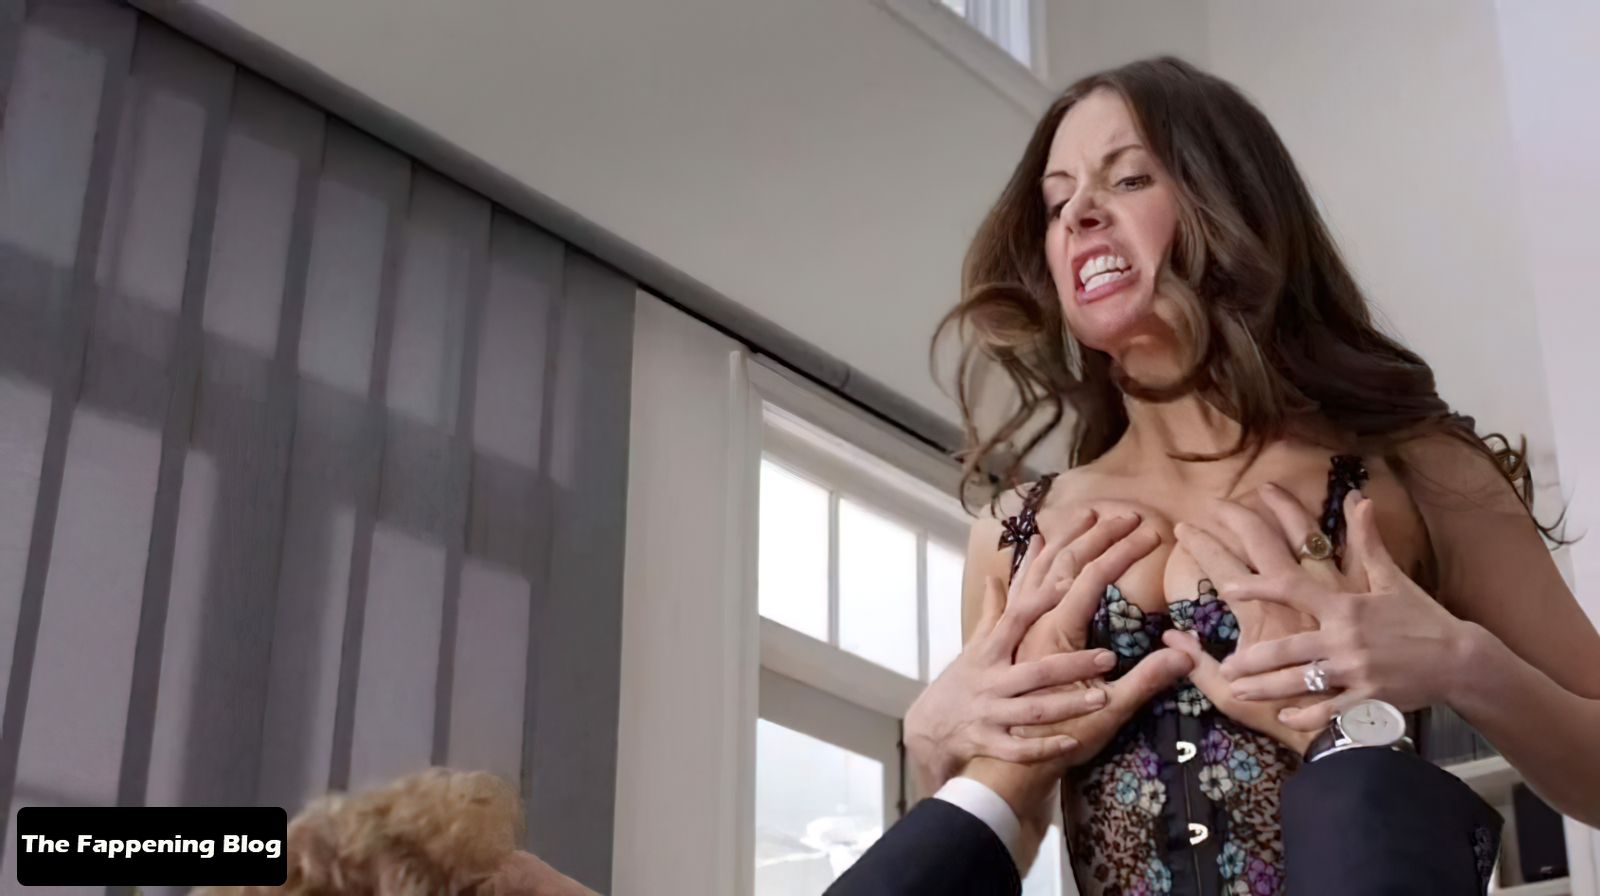 Alison-Brie-Nude-Porn-Photo-Collection-Leak-The-Fappening-Blog-35.jpg